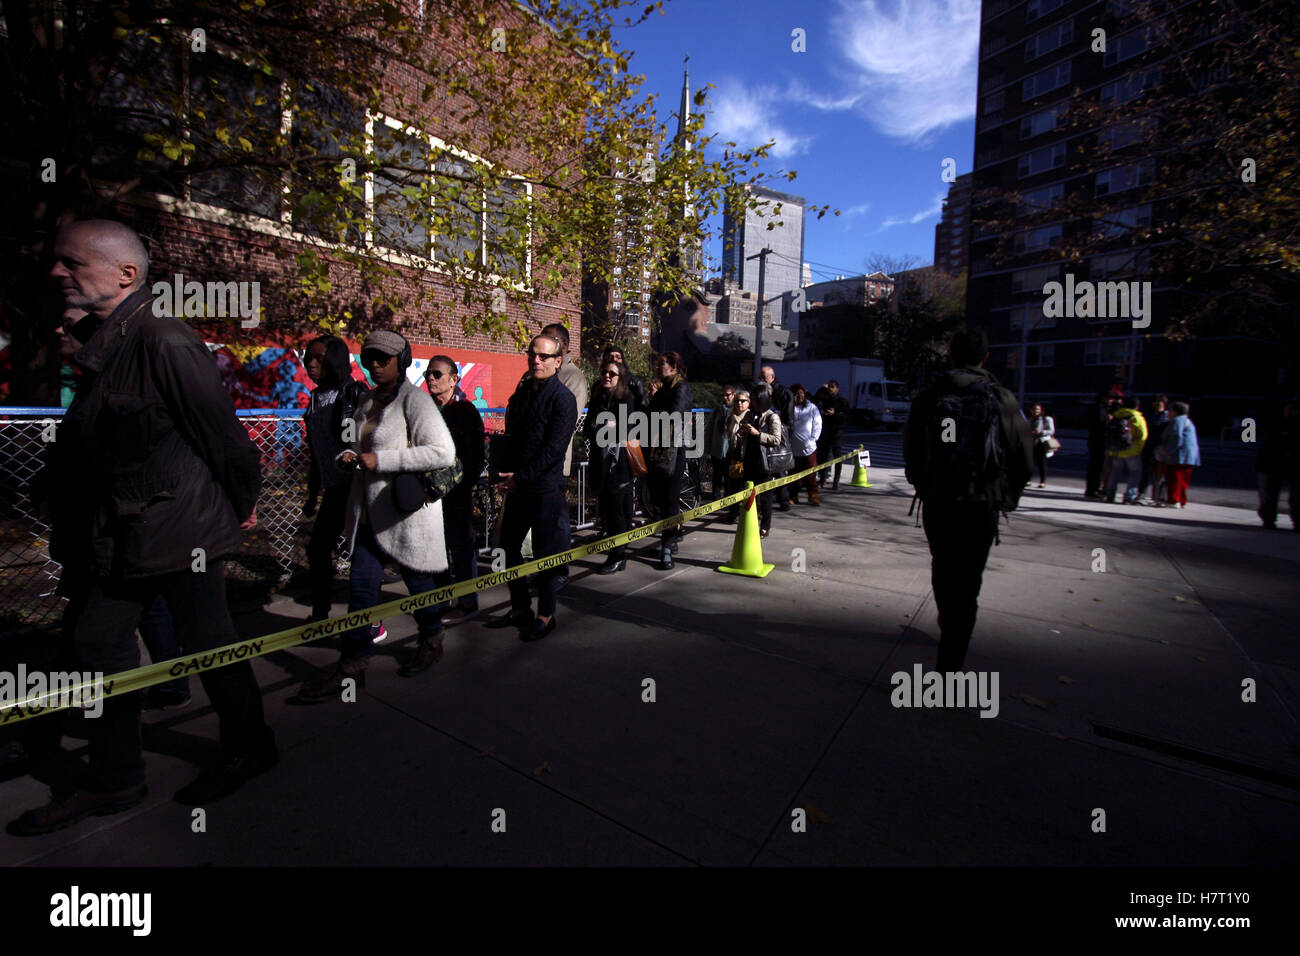 New York, United States. 08th Nov, 2016. Voters in the Chelsea neighborhood of Manhattan in New York City line up to vote on Election Day, November 8, 2016. Record numbers of voters are turning our for the historic United States Presidential election between Hilary Clinton and Donald Trump. Credit:  Adam Stoltman/Alamy Live News Stock Photo